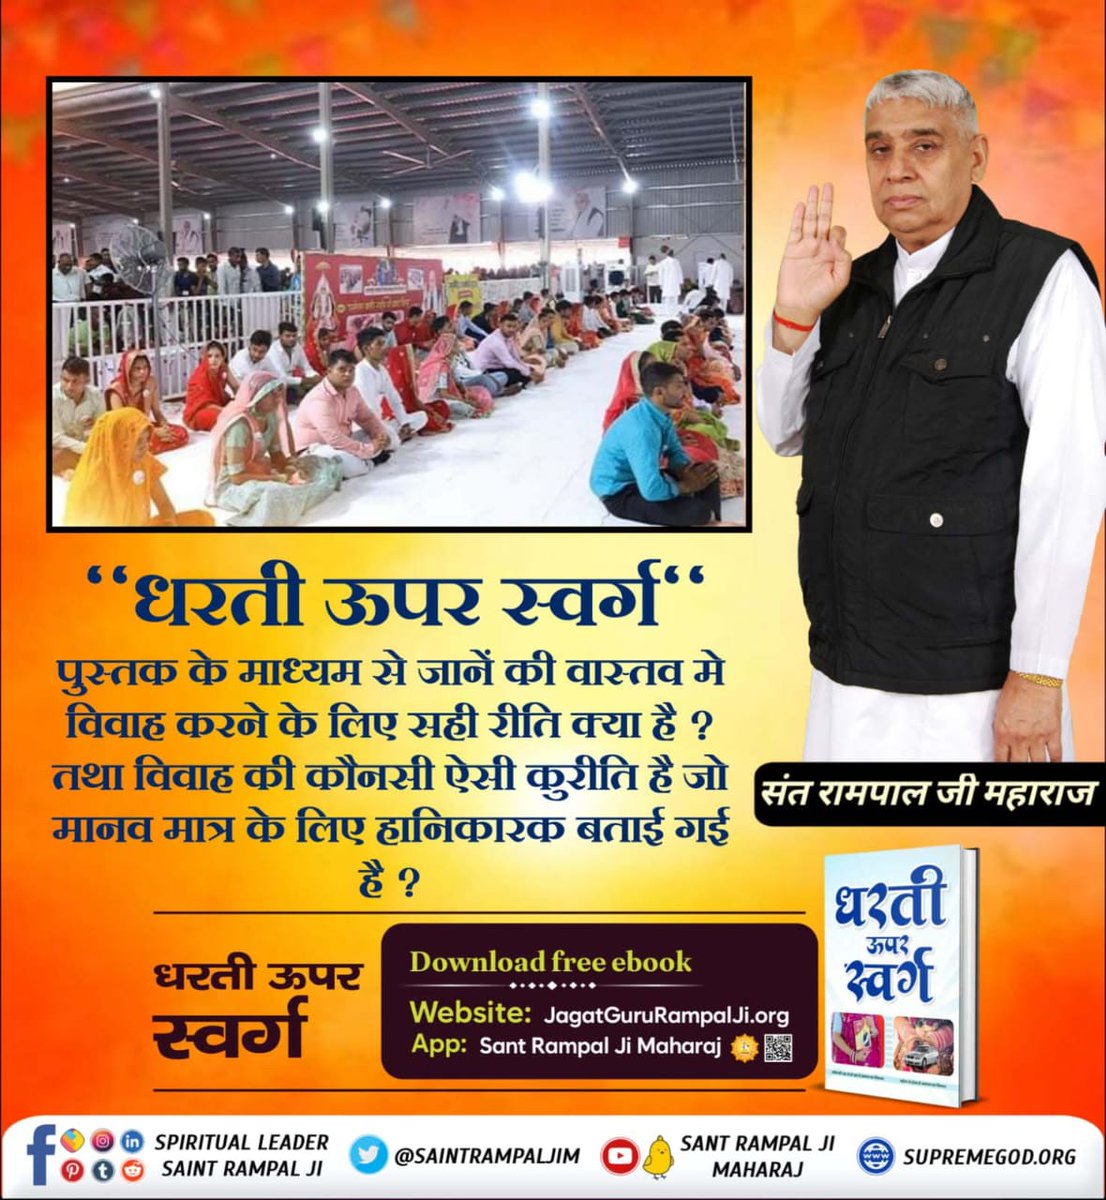 #धरती_को_स्वर्ग_बनाना_है
IN HIS BOOK DHARTI UPAR SWARG,

Sant Rampal Ji Maharaj

has explained that by consuming the medicine of true spiritual knowledge provided by a complete saint, society can easily put an end to prevalent vices and addictions, thus transforming the Earth